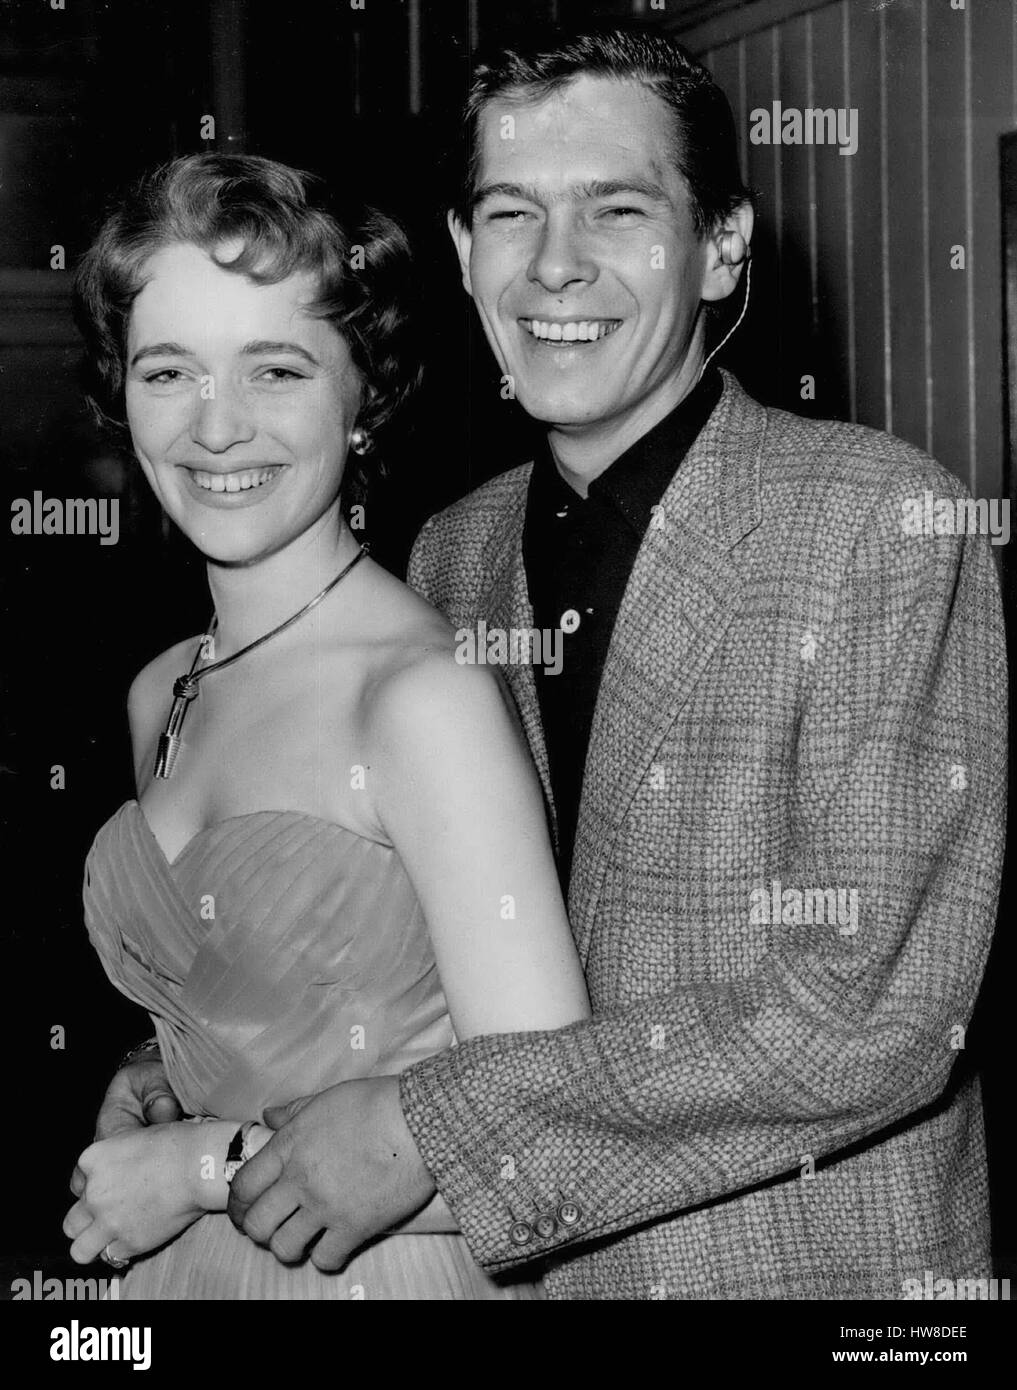 May 05, 1953 - Johnnie Ray Engaged: The famous American Crooner, Johnnie Ray, has announced his engagement to 21- year old singer, Sylvia Drew, of Wimbledon- a vocalist with Vic Lewis's band- which is appearing with Johnnie Ray on his British tour. Johnnie Ray opens this evening at the Birmingham Hippodrome. Picture Shows: Johnnie Ray photographed with Sylvia Drew, to whom he has become engaged. (Credit Image: © Keystone Press Agency/Keystone USA via ZUMAPRESS.com) Stock Photo